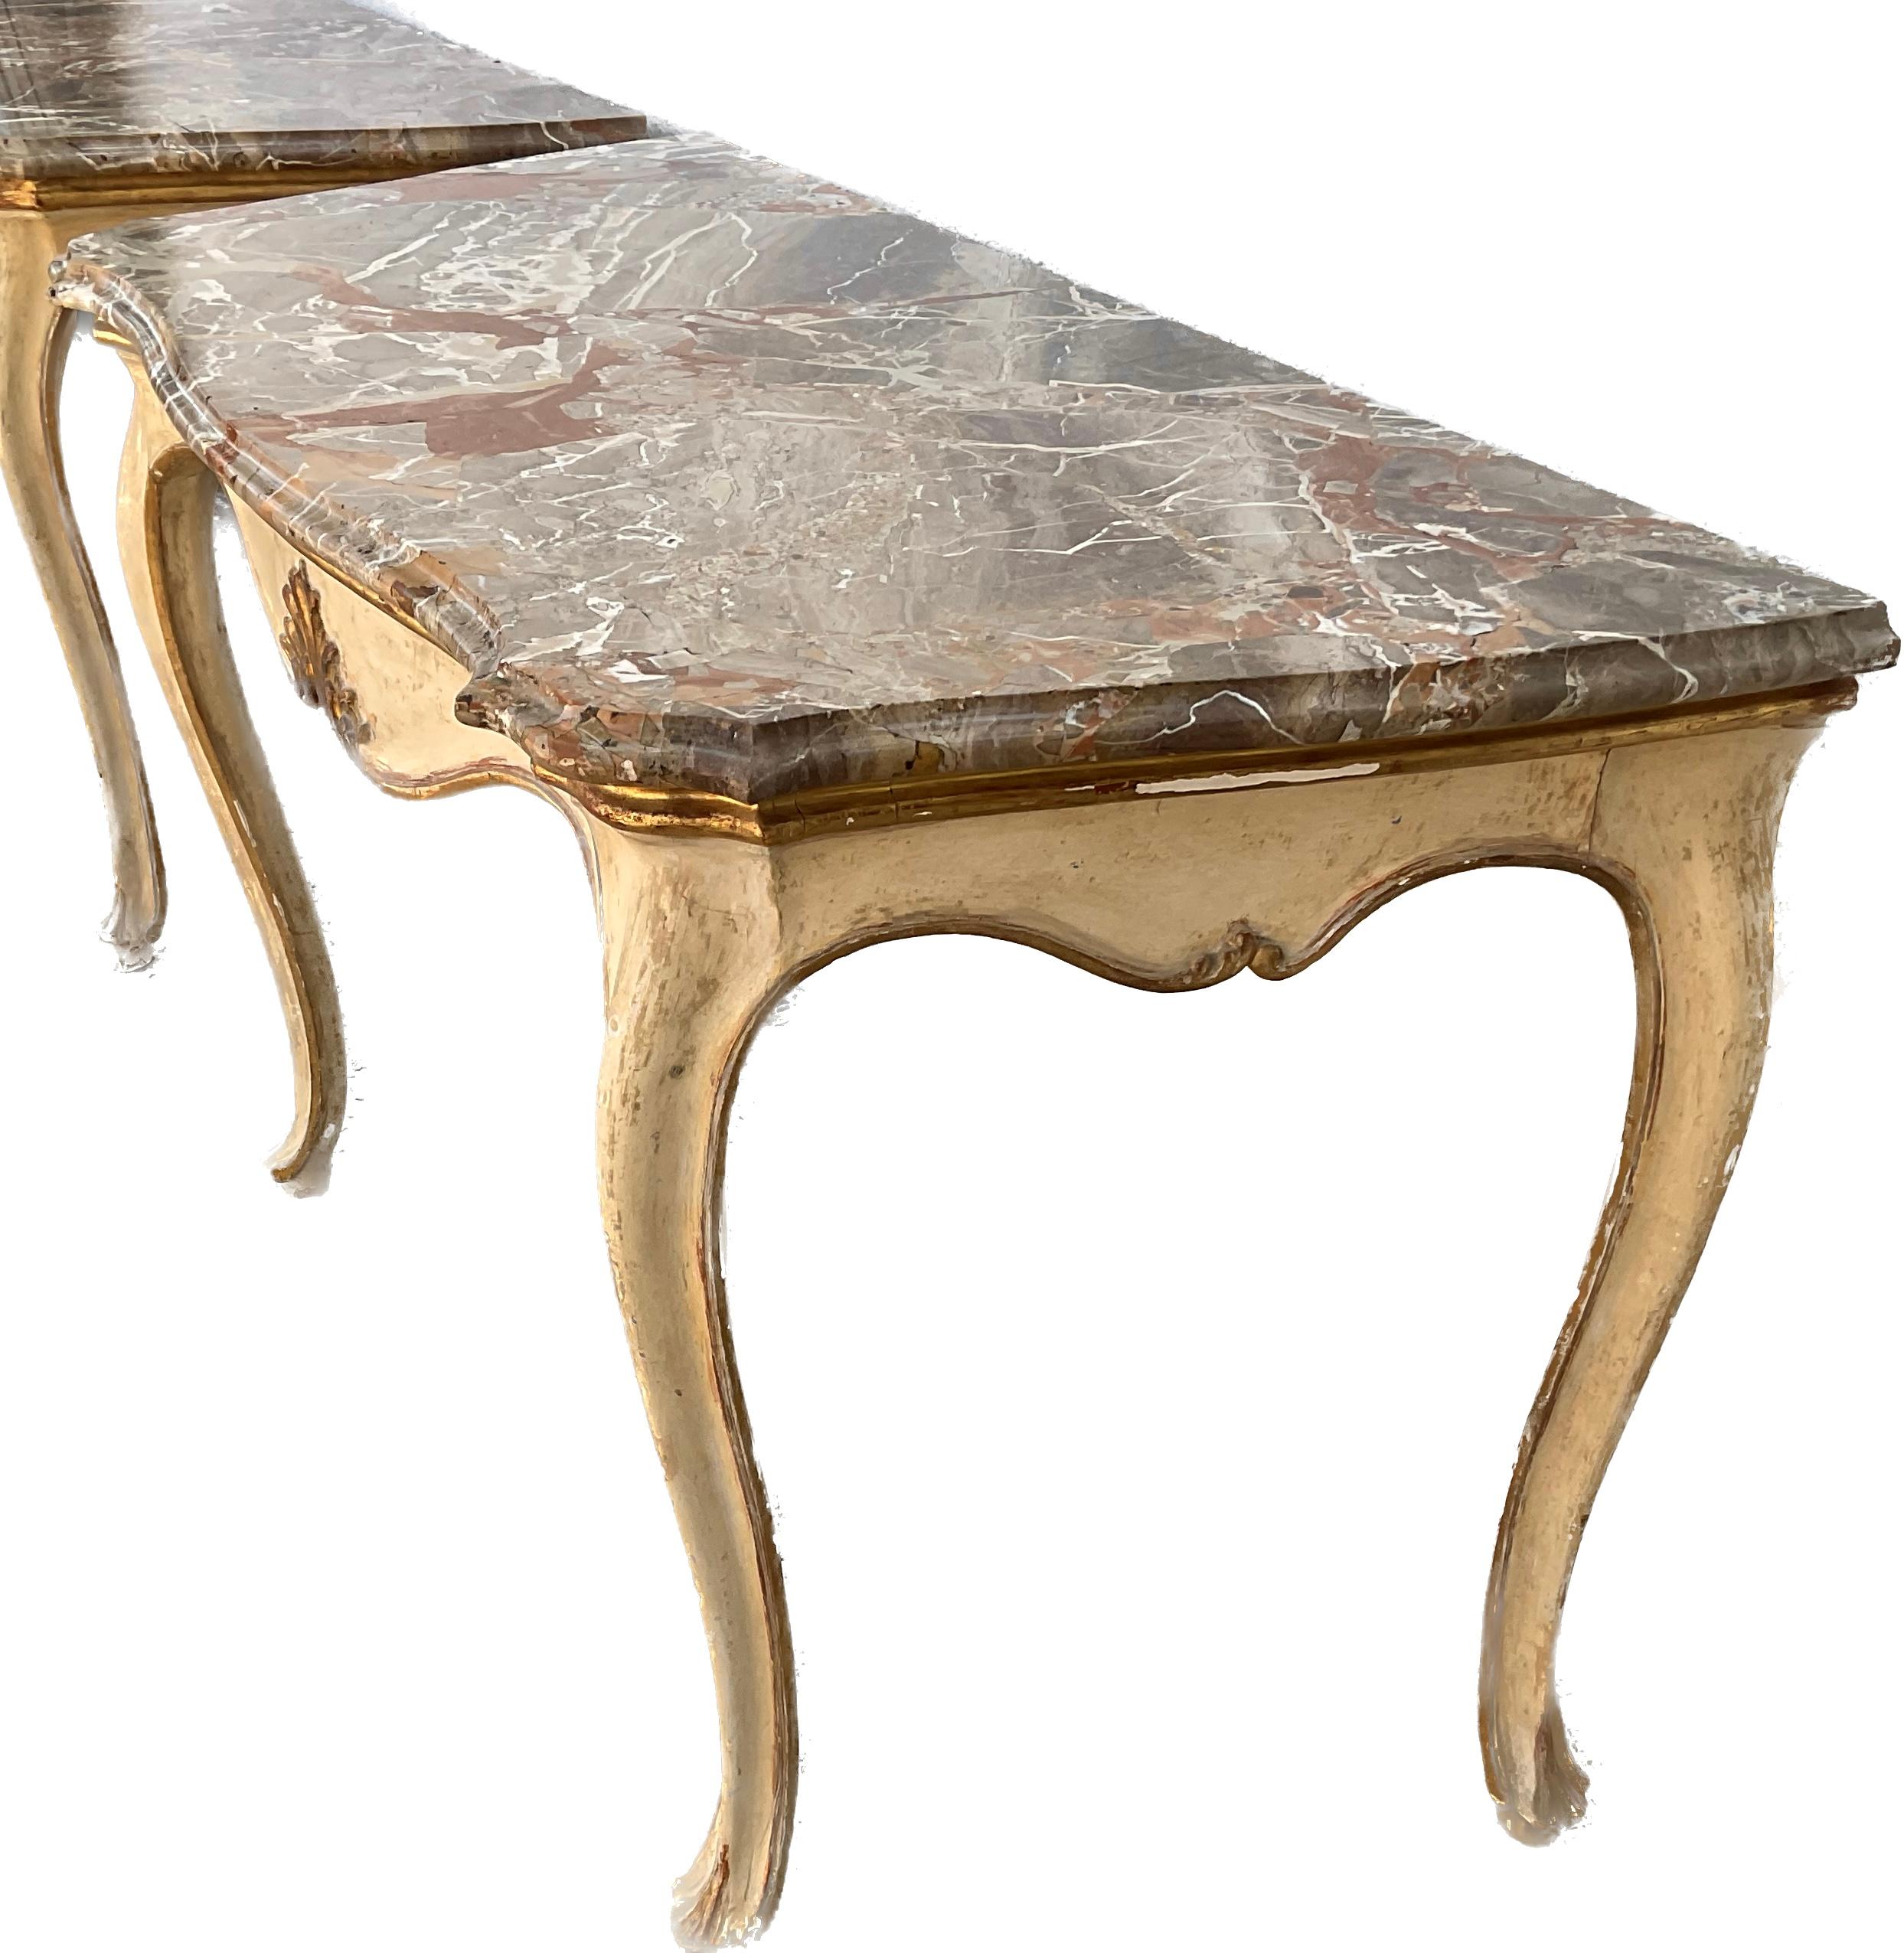 Pair of 19th Century Italian Painted and Gilt Marble-Top Console Tables In Good Condition For Sale In Bradenton, FL